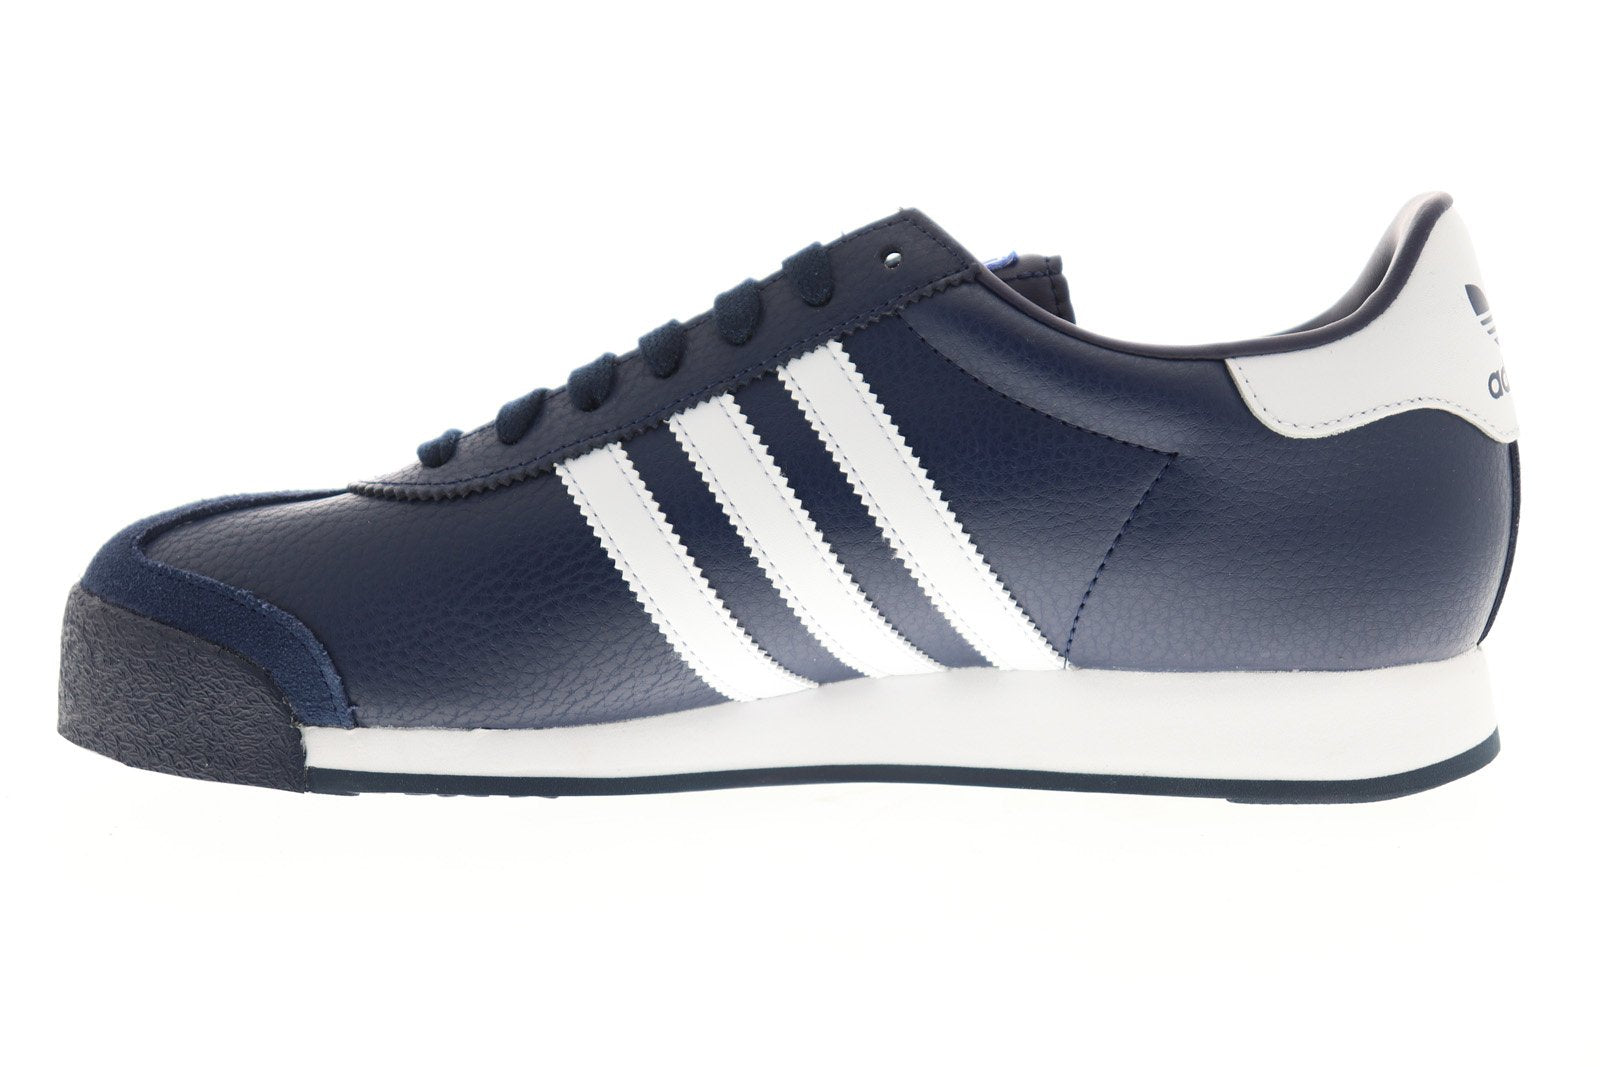 Adidas Samoa EG1577 Mens Blue Low Top Lace Up Lifestyle Sneakers Shoes ...